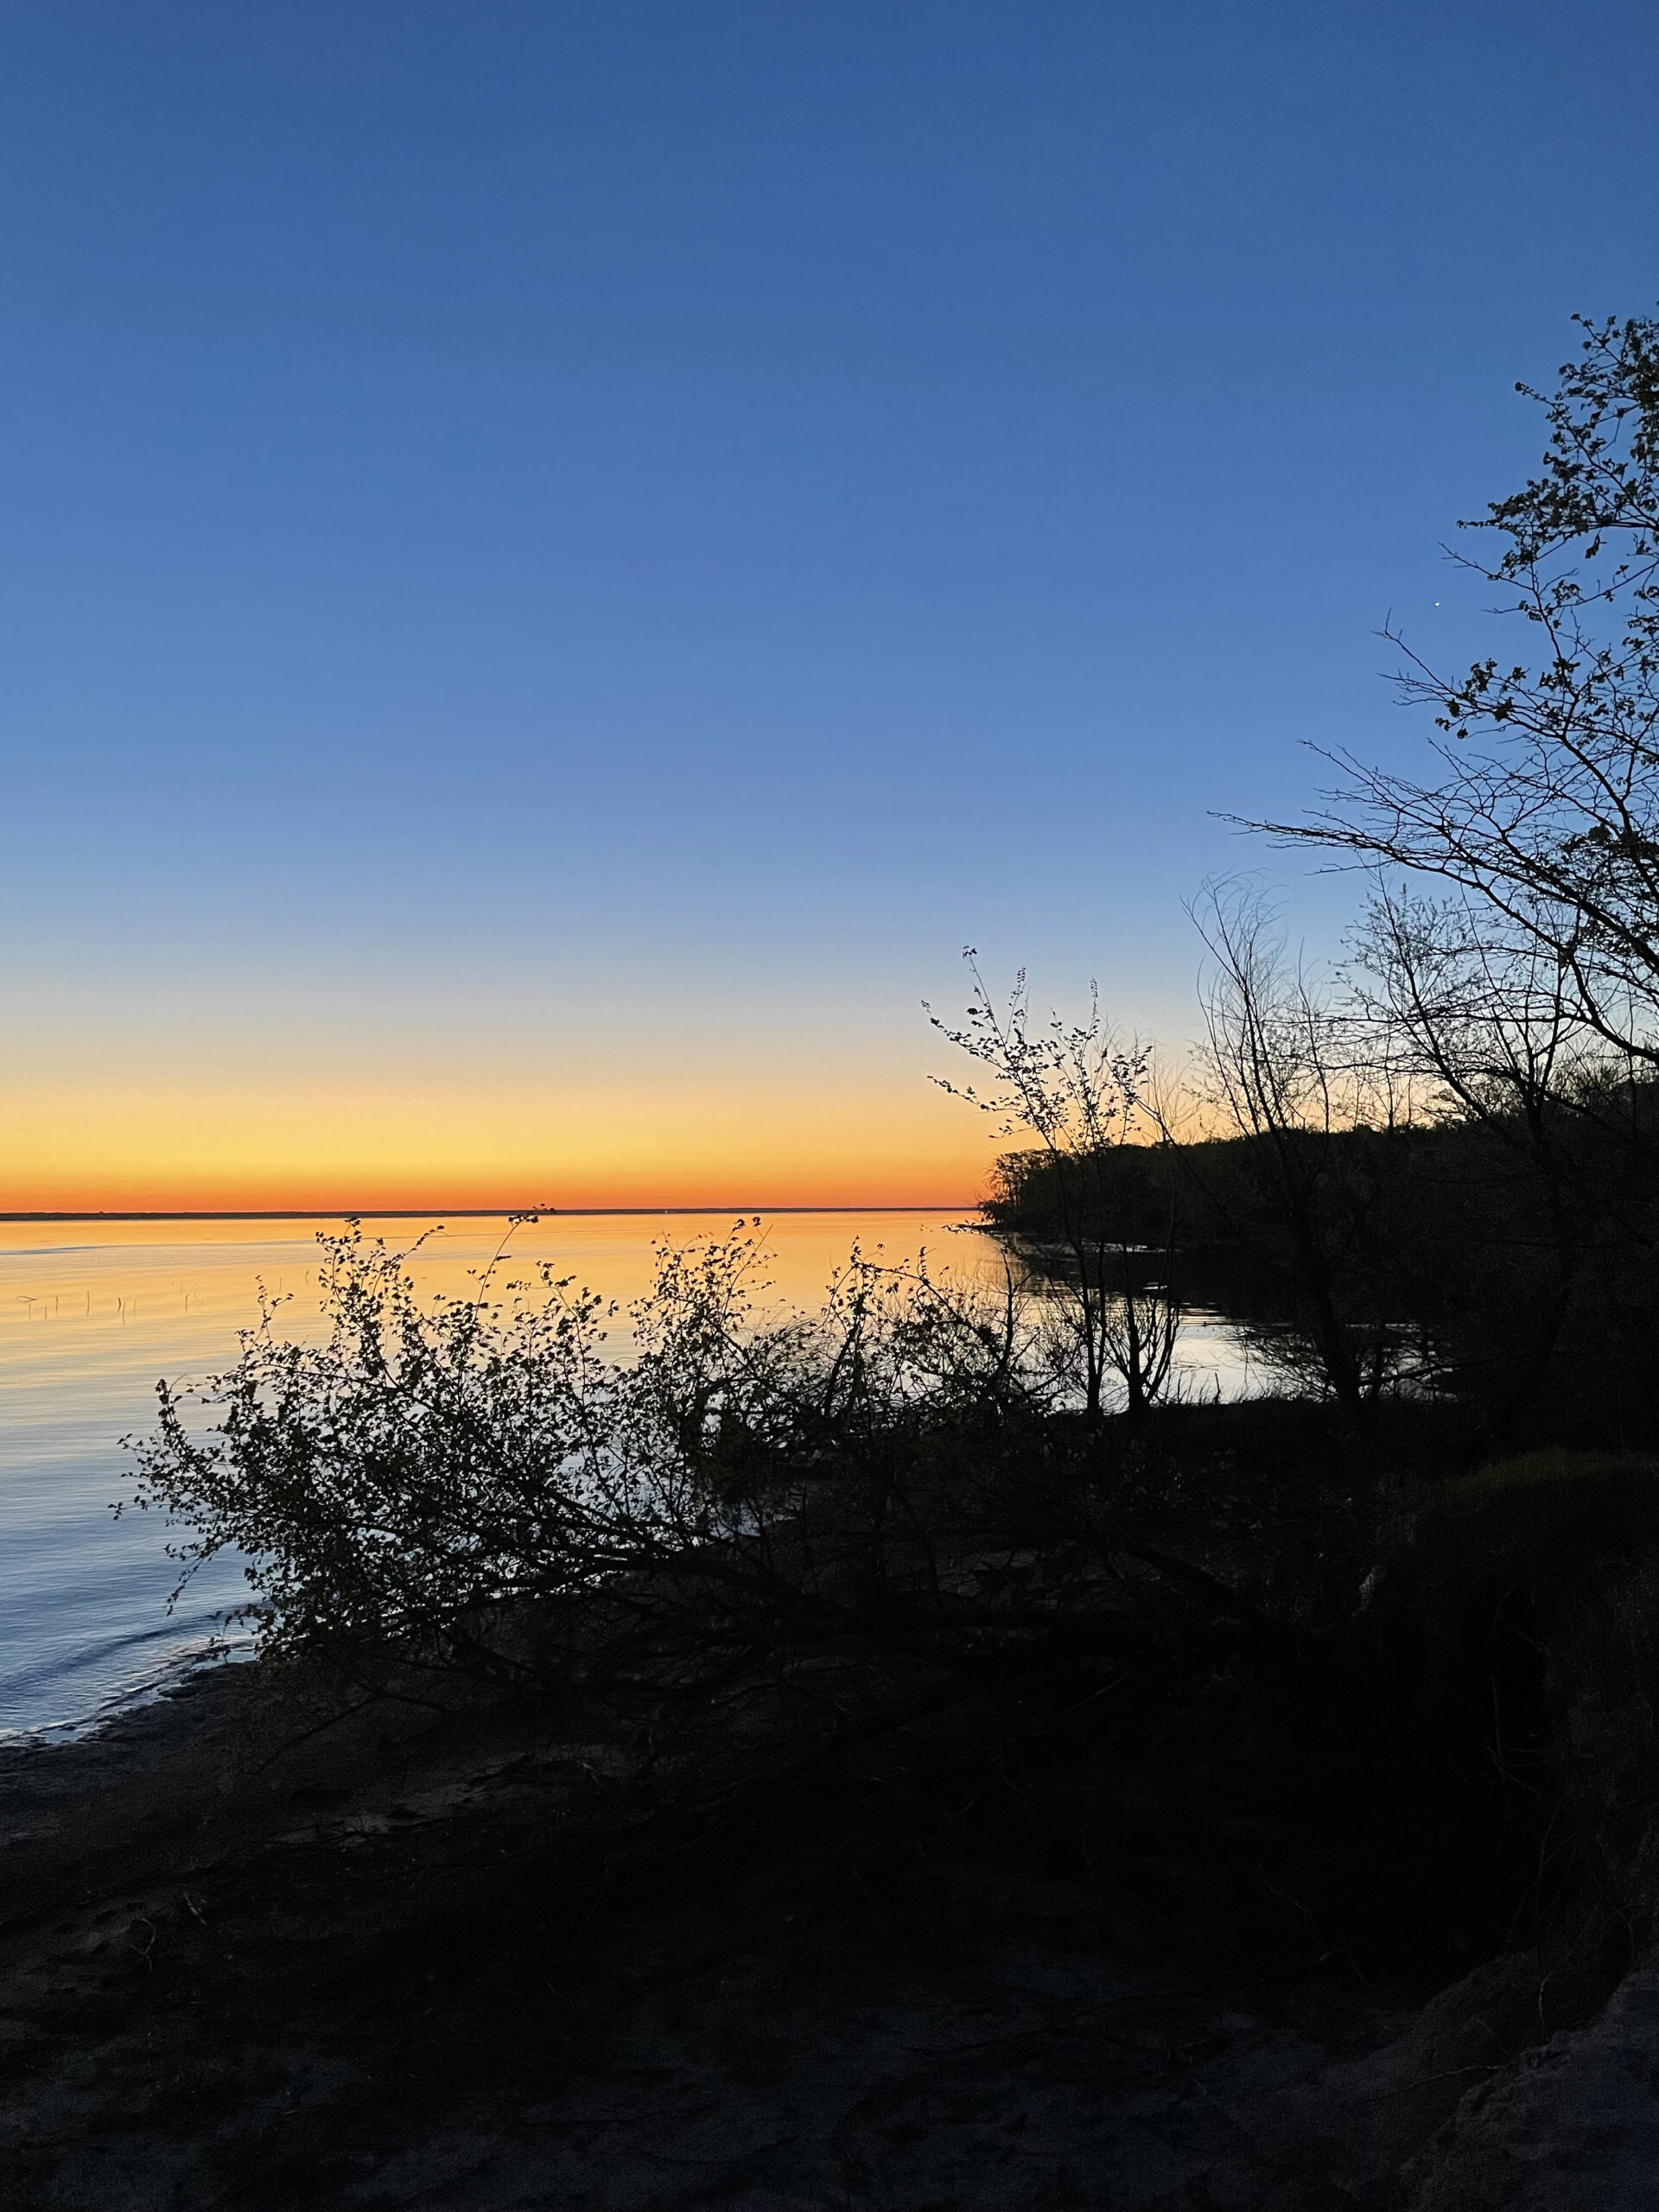 A colorful sky above a body of water is orange at the horizon fading to yellow and then a deep blue higher up. The water below reflects the colors of the sky. The shoreline with bushes and trees are a black silhouette.